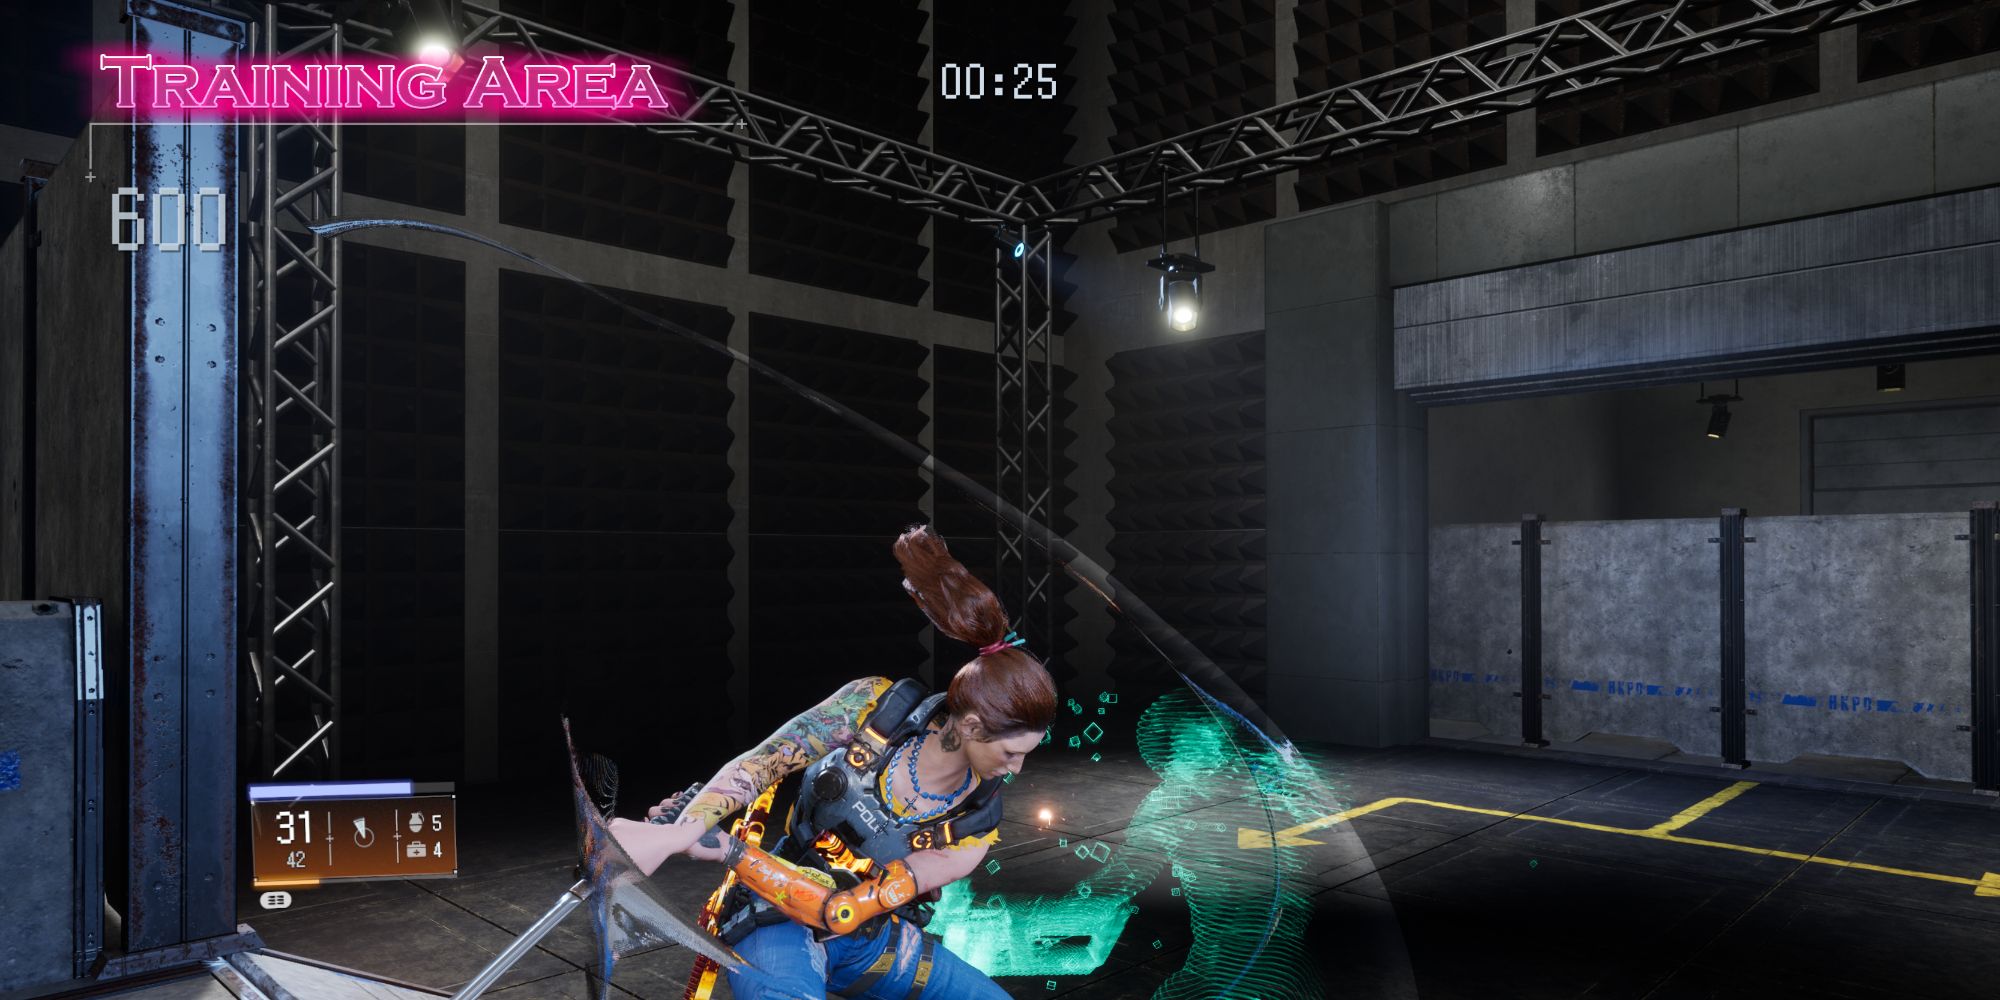 Stone slashing a holographic enemy wielding a Grenade Launcher with her Katana in the Third Training Challenge in Wanted: Dead